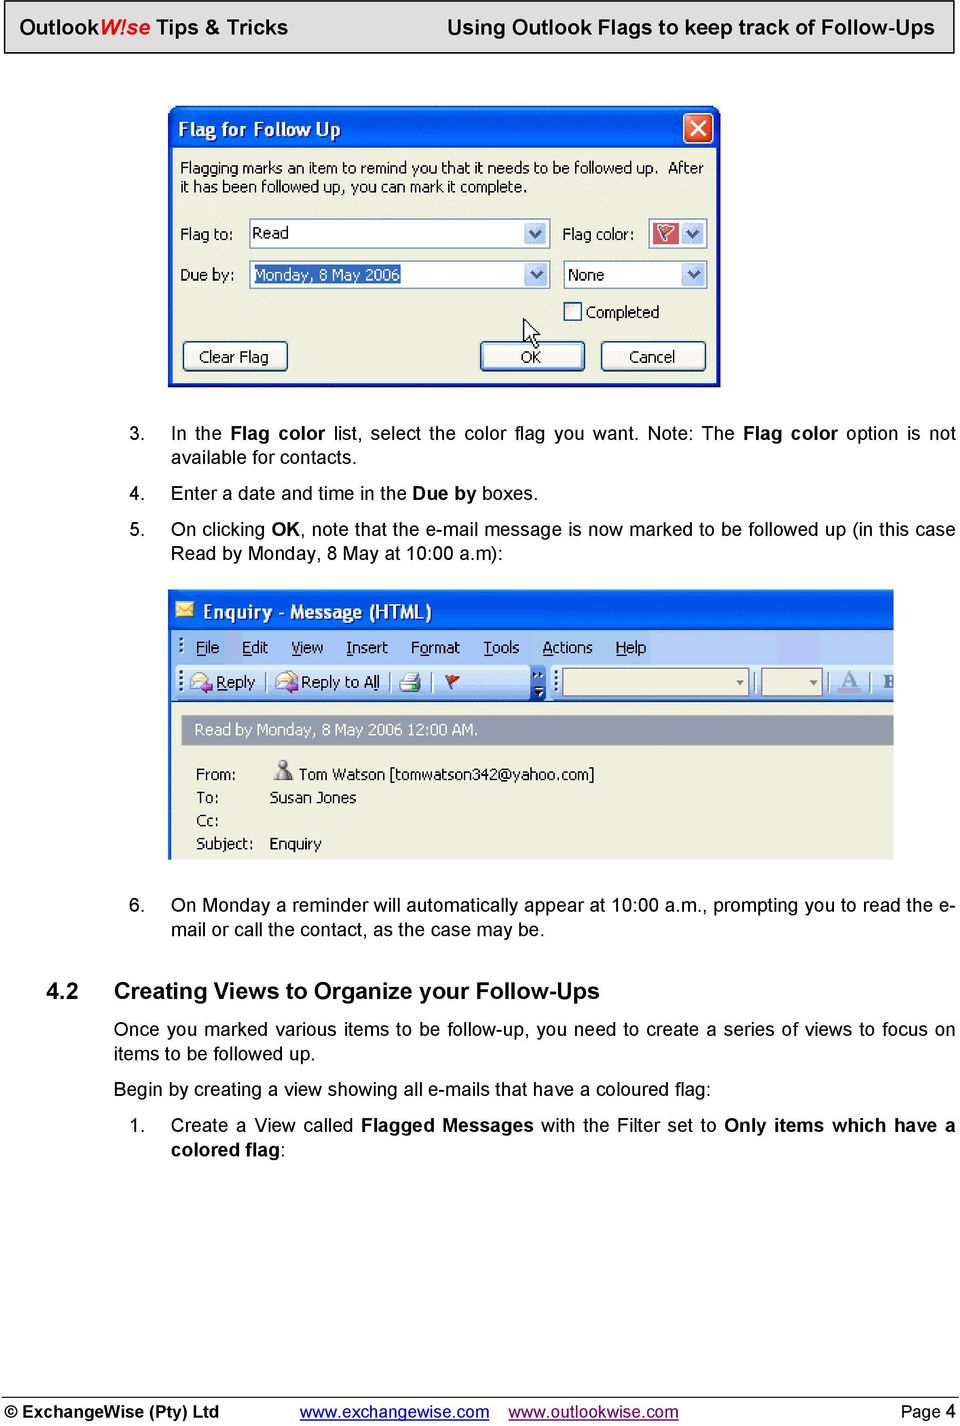 4.2 Creating Views to Organize your Follow-Ups Once you marked various items to be follow-up, you need to create a series of views to focus on items to be followed up.